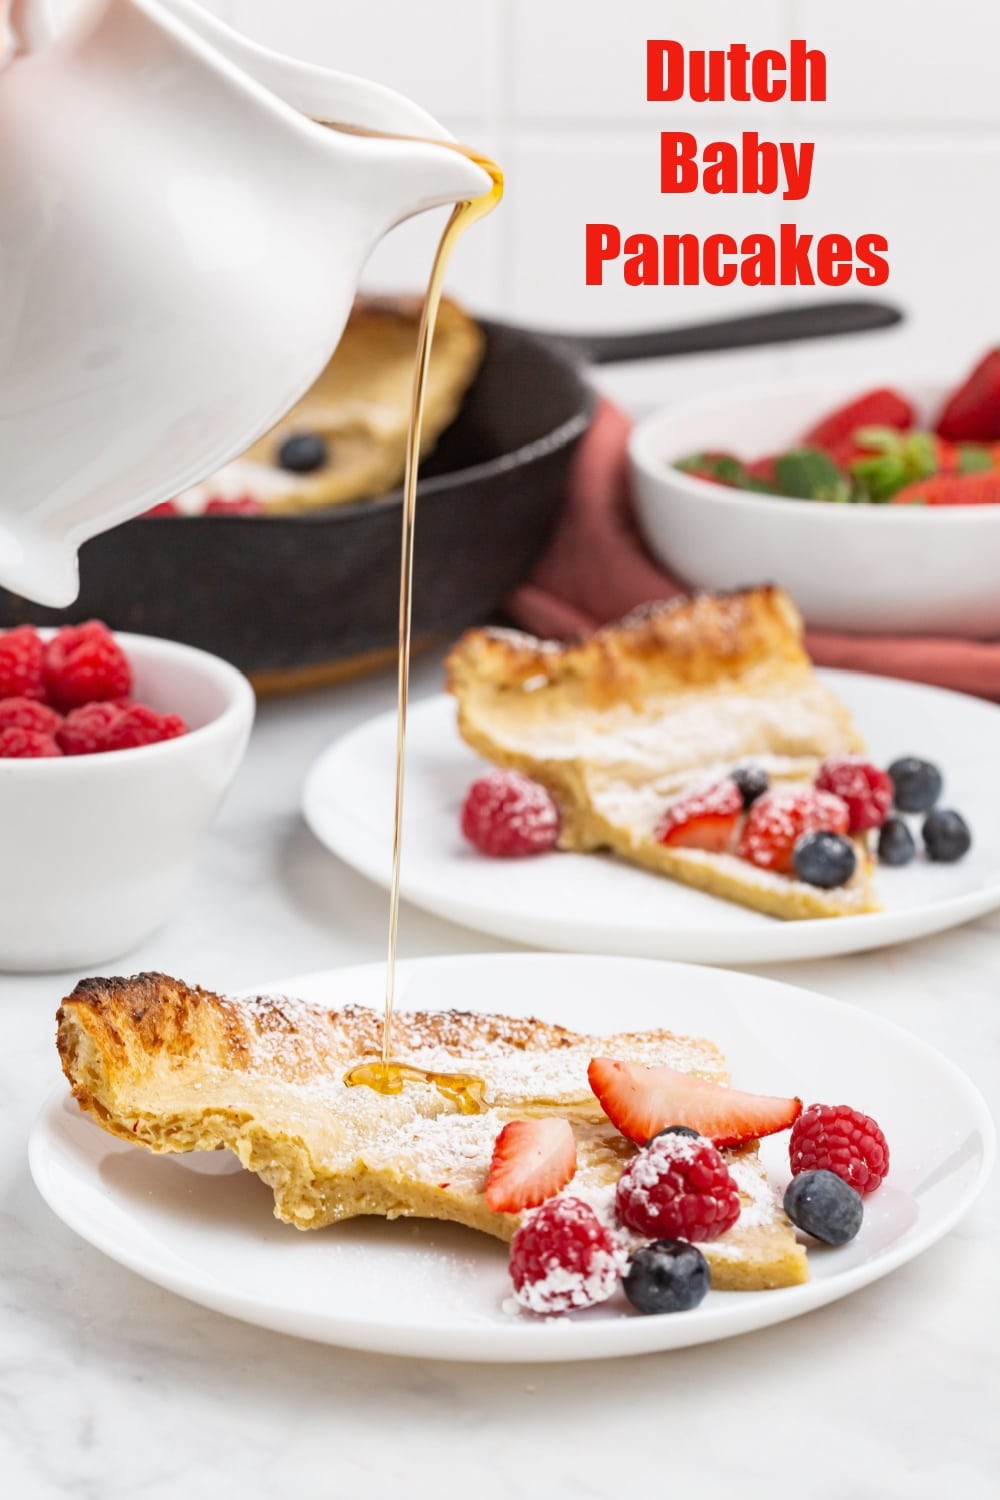 When the family is craving pancakes, serve up this baked and custardy version covered in sweet berries and wow everyone at the breakfast table. via @cmpollak1